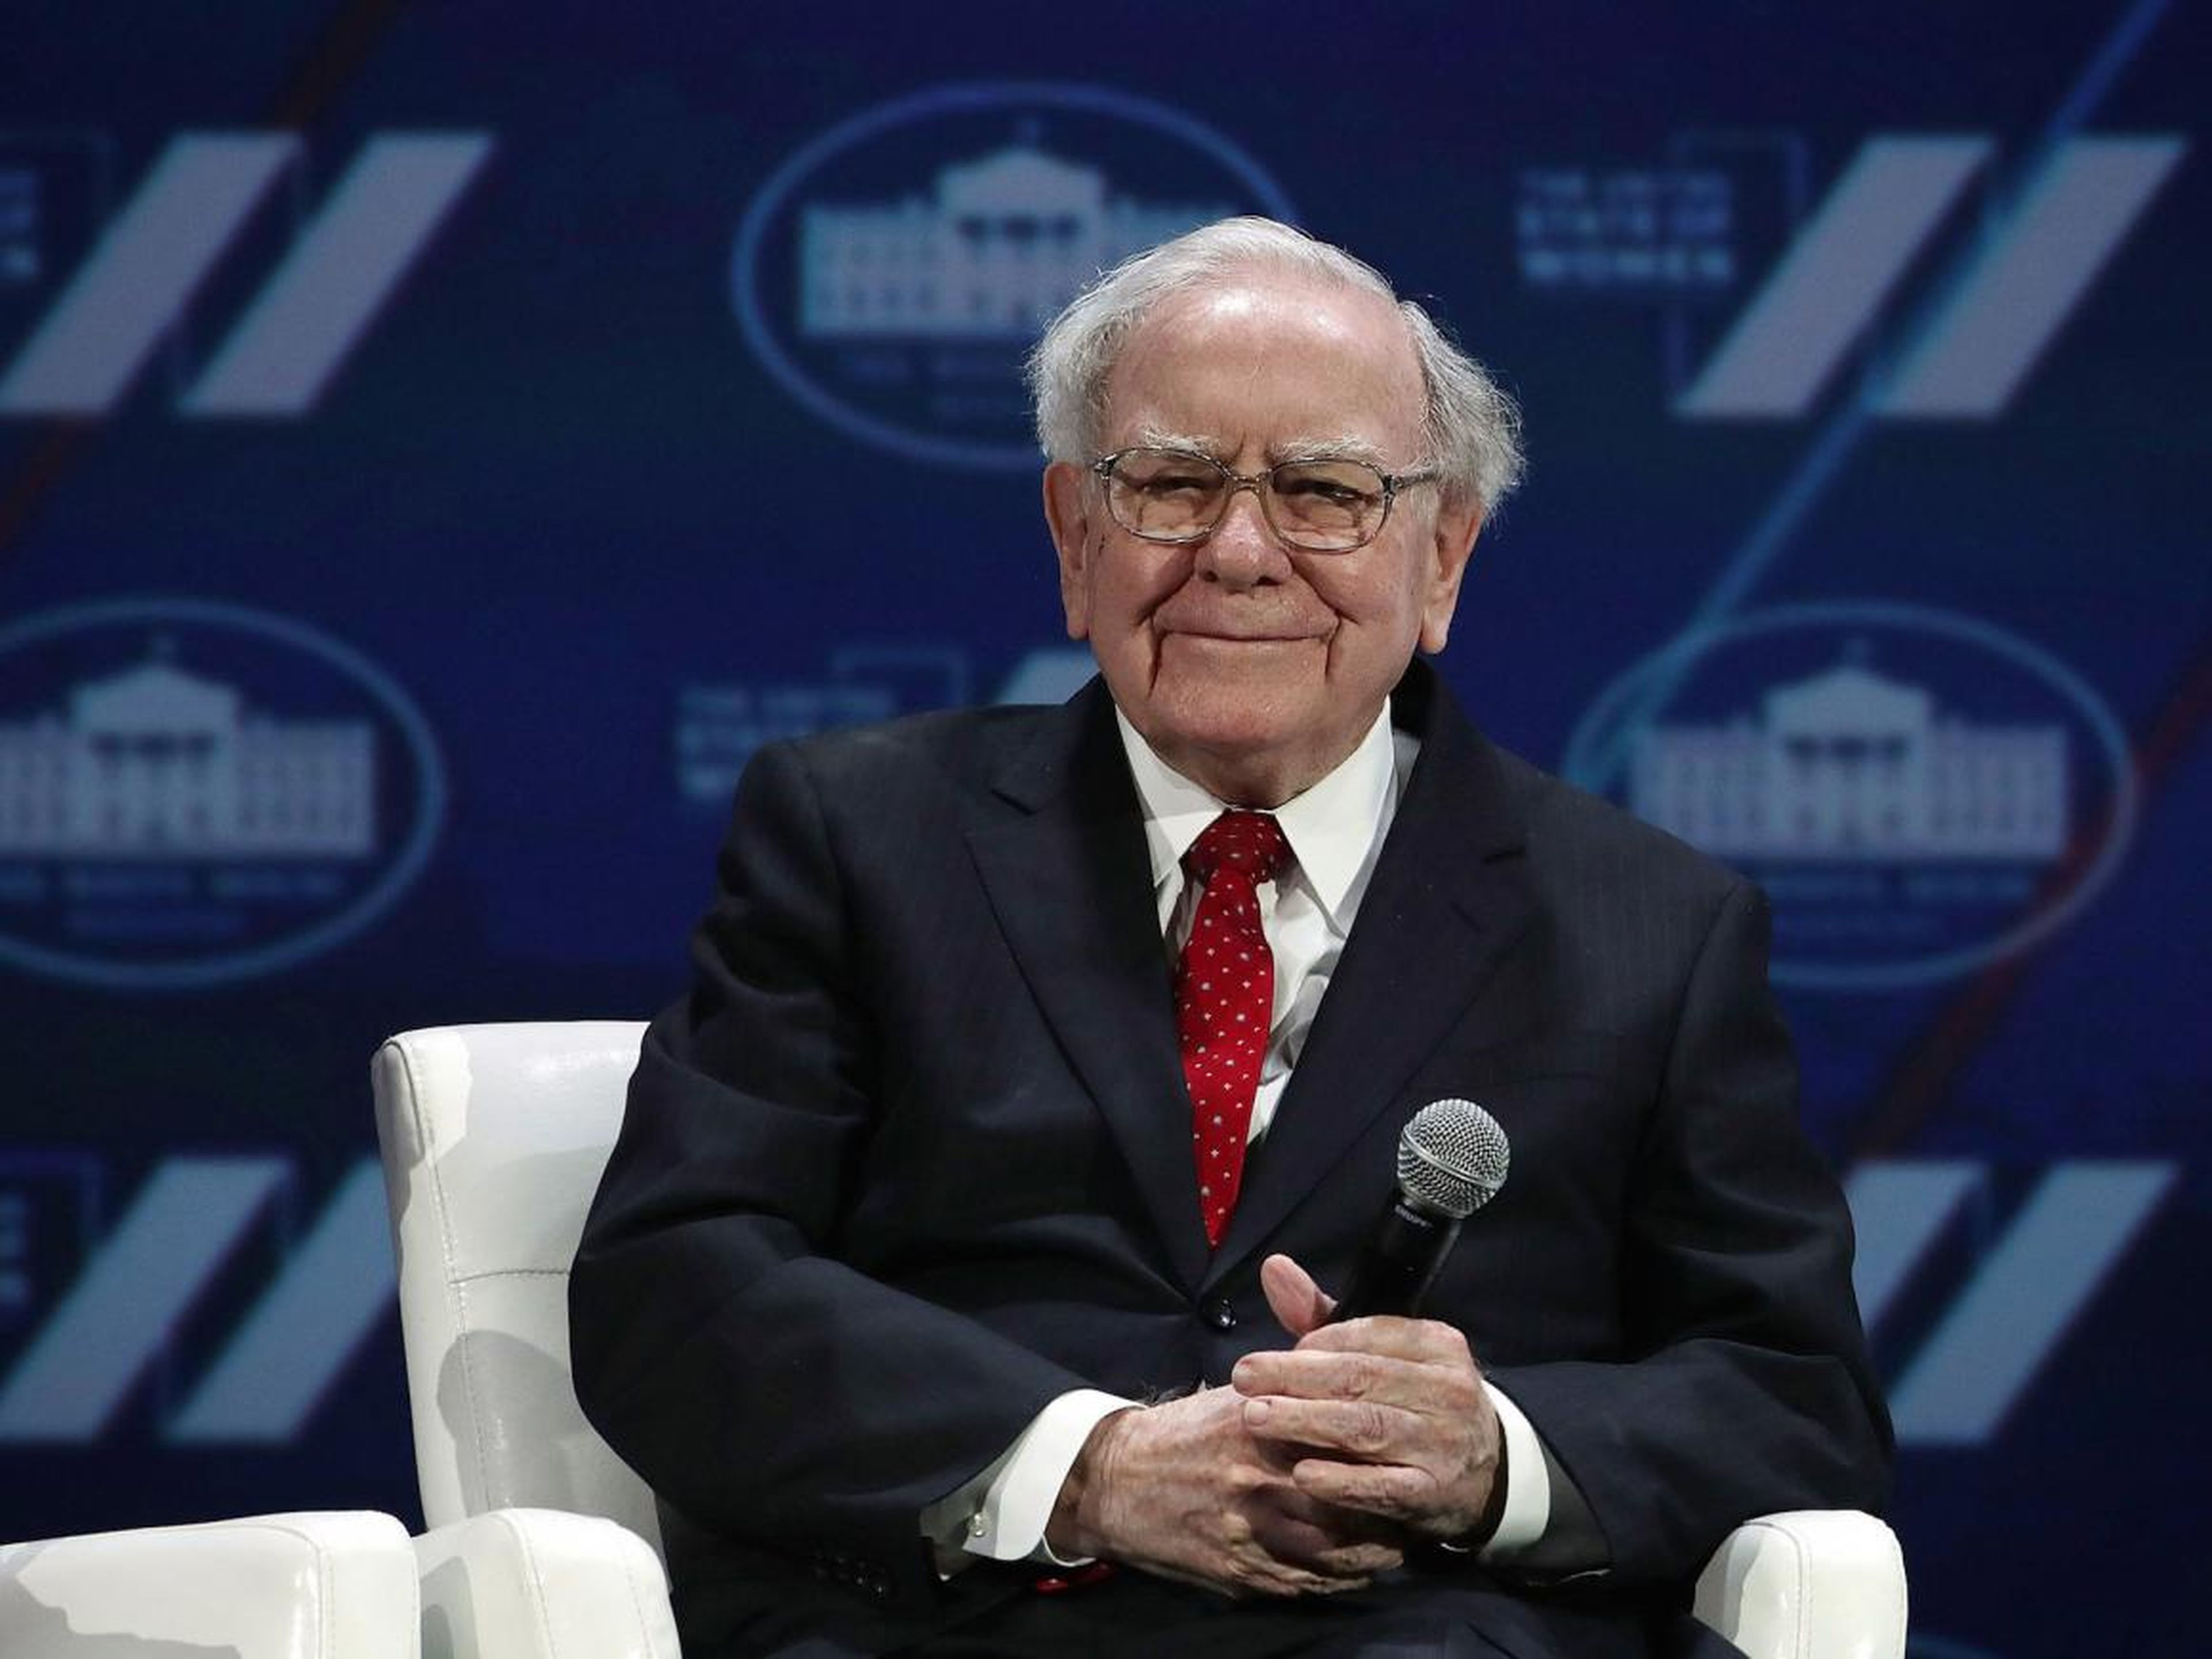 That same week, he donated about $800 million in Berkshire Hathaway stocks to the Susan Thompson Buffett Foundation, Sherwood Foundation, Howard G. Buffett Foundation, and NoVo Foundation.